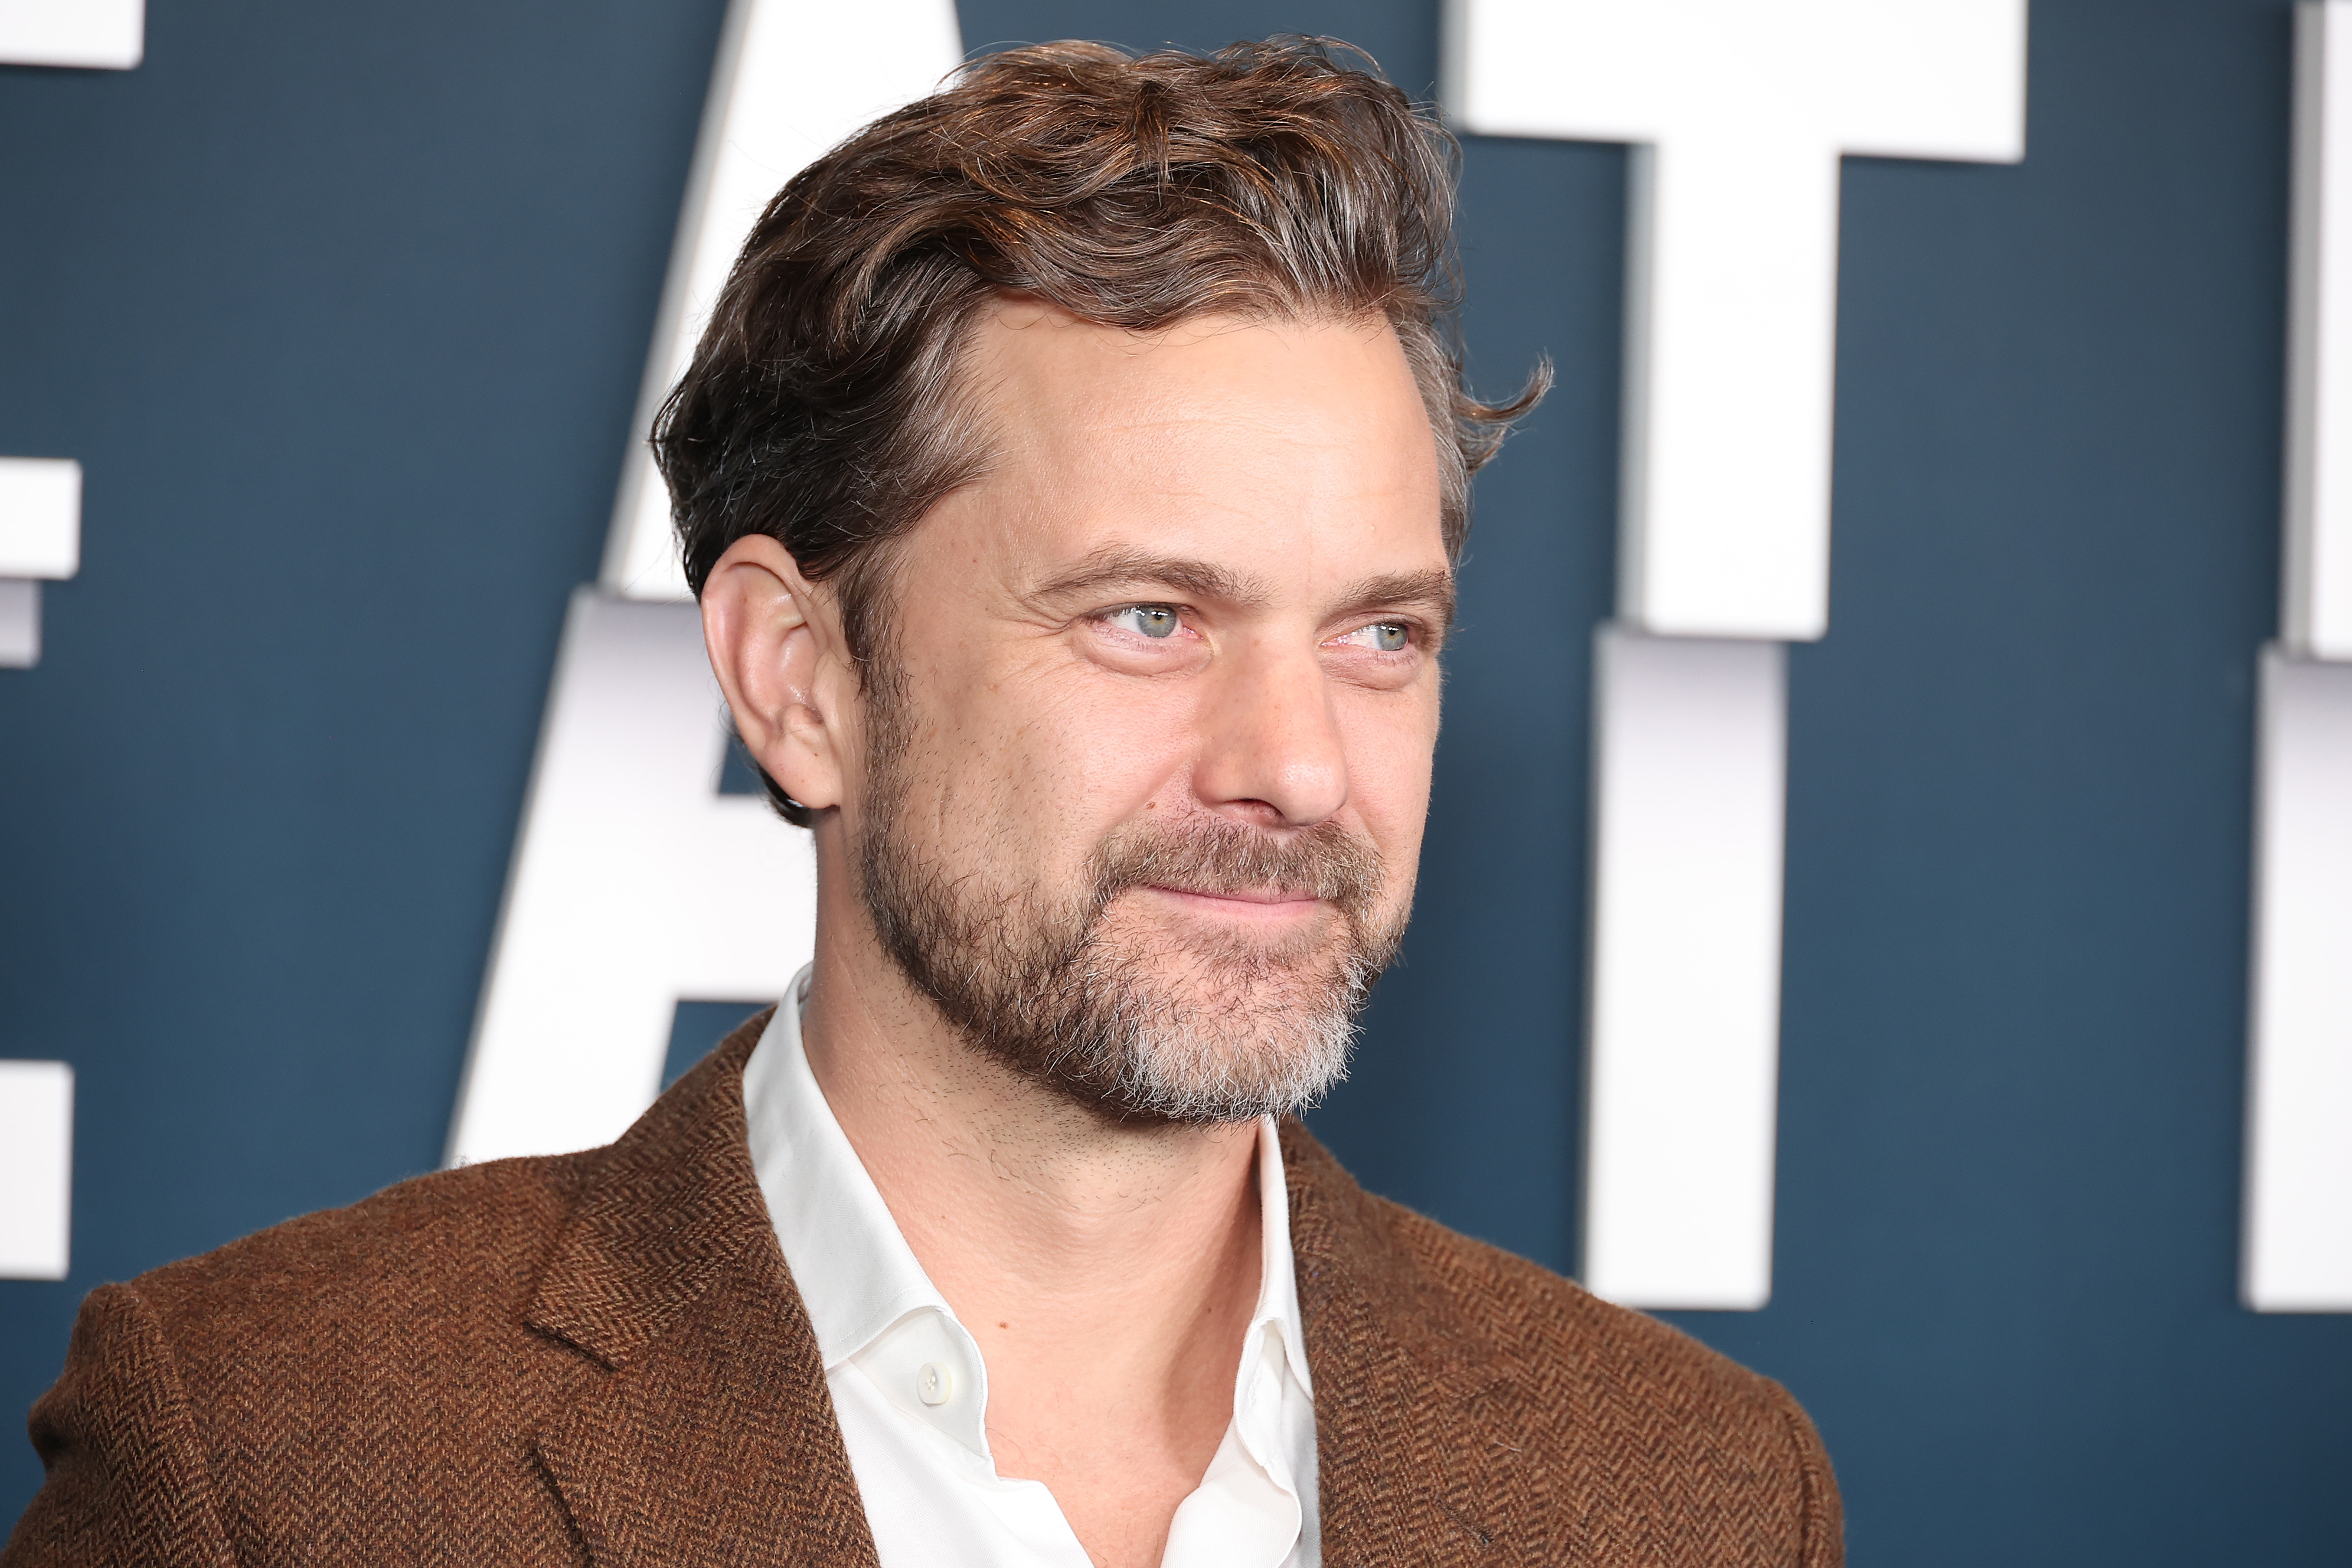 Joshua Jackson in a blazer and shirt, smiling at an event